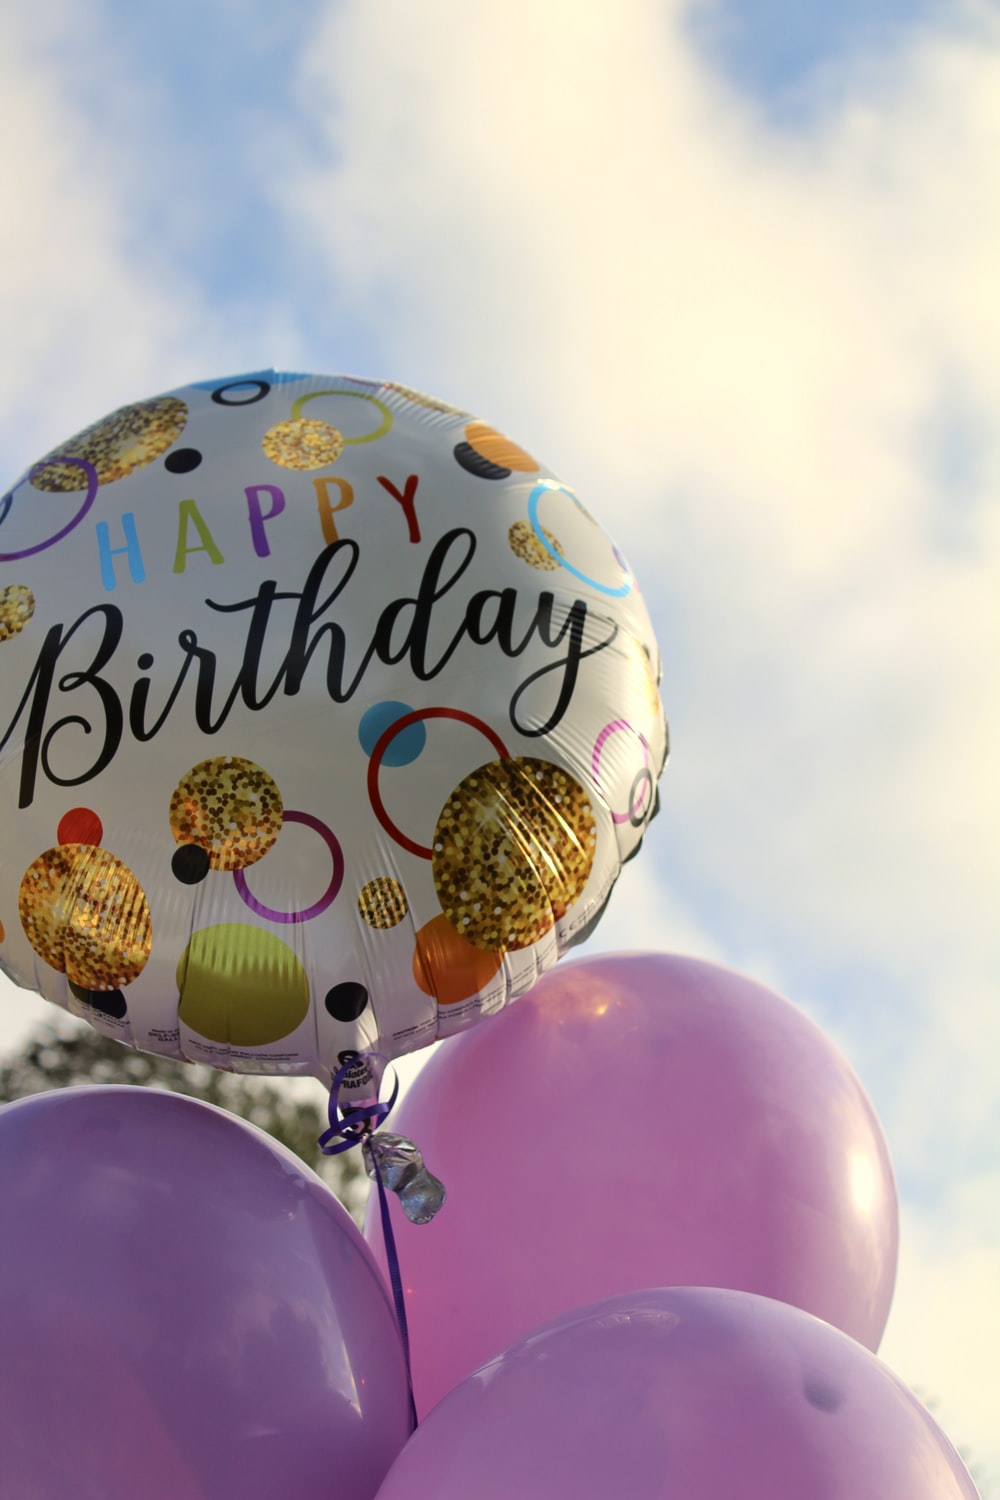 Birthday Card Picture. Download Free Image